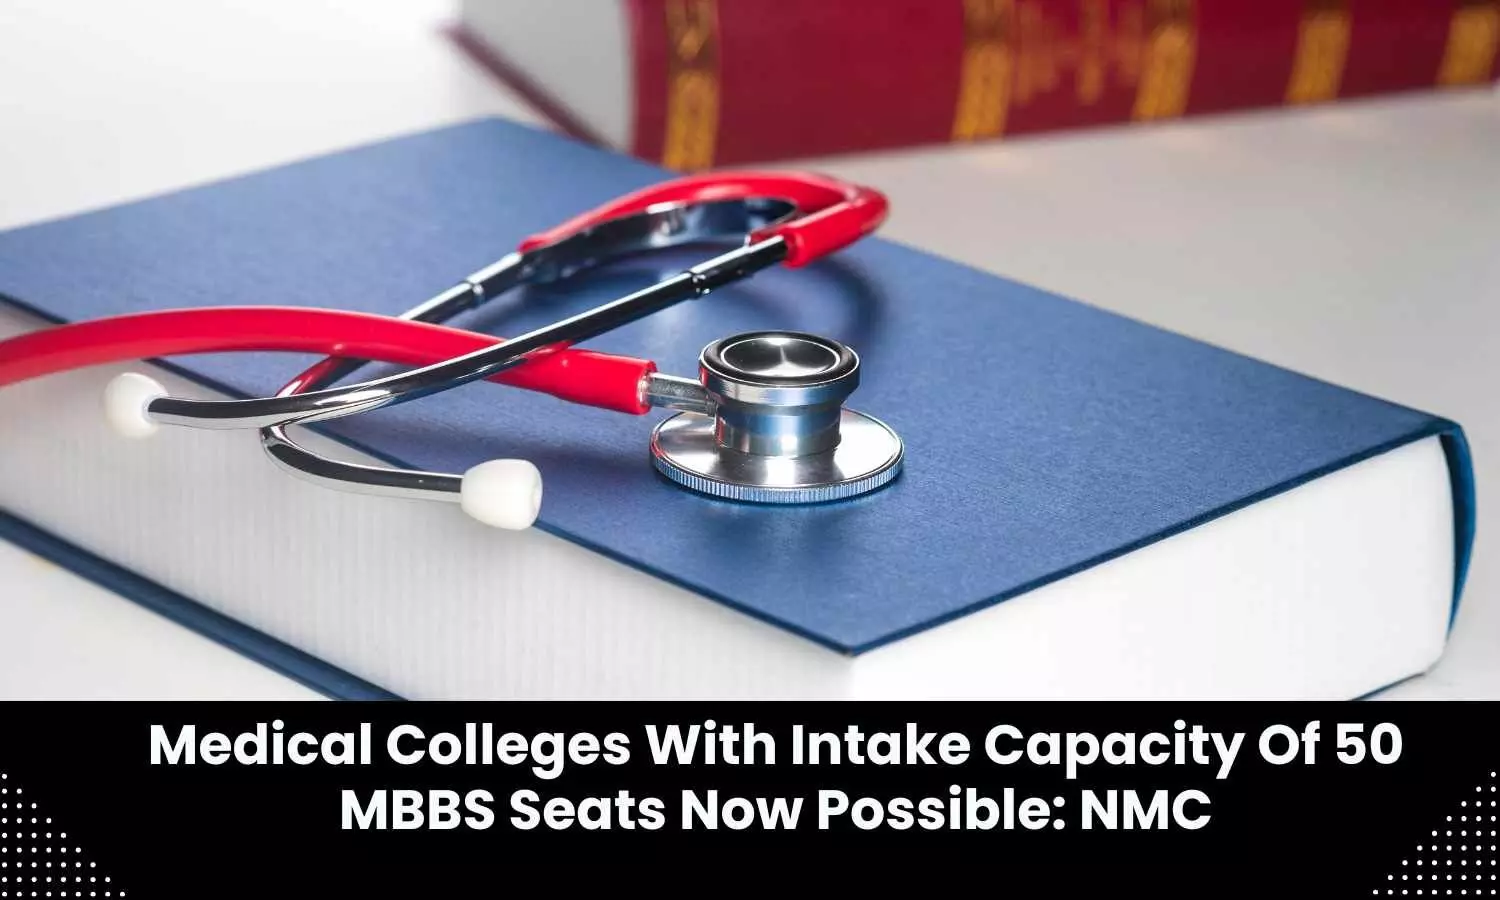 MSR 2023: Now possible to open medical college with intake capacity of only 50 MBBS seats